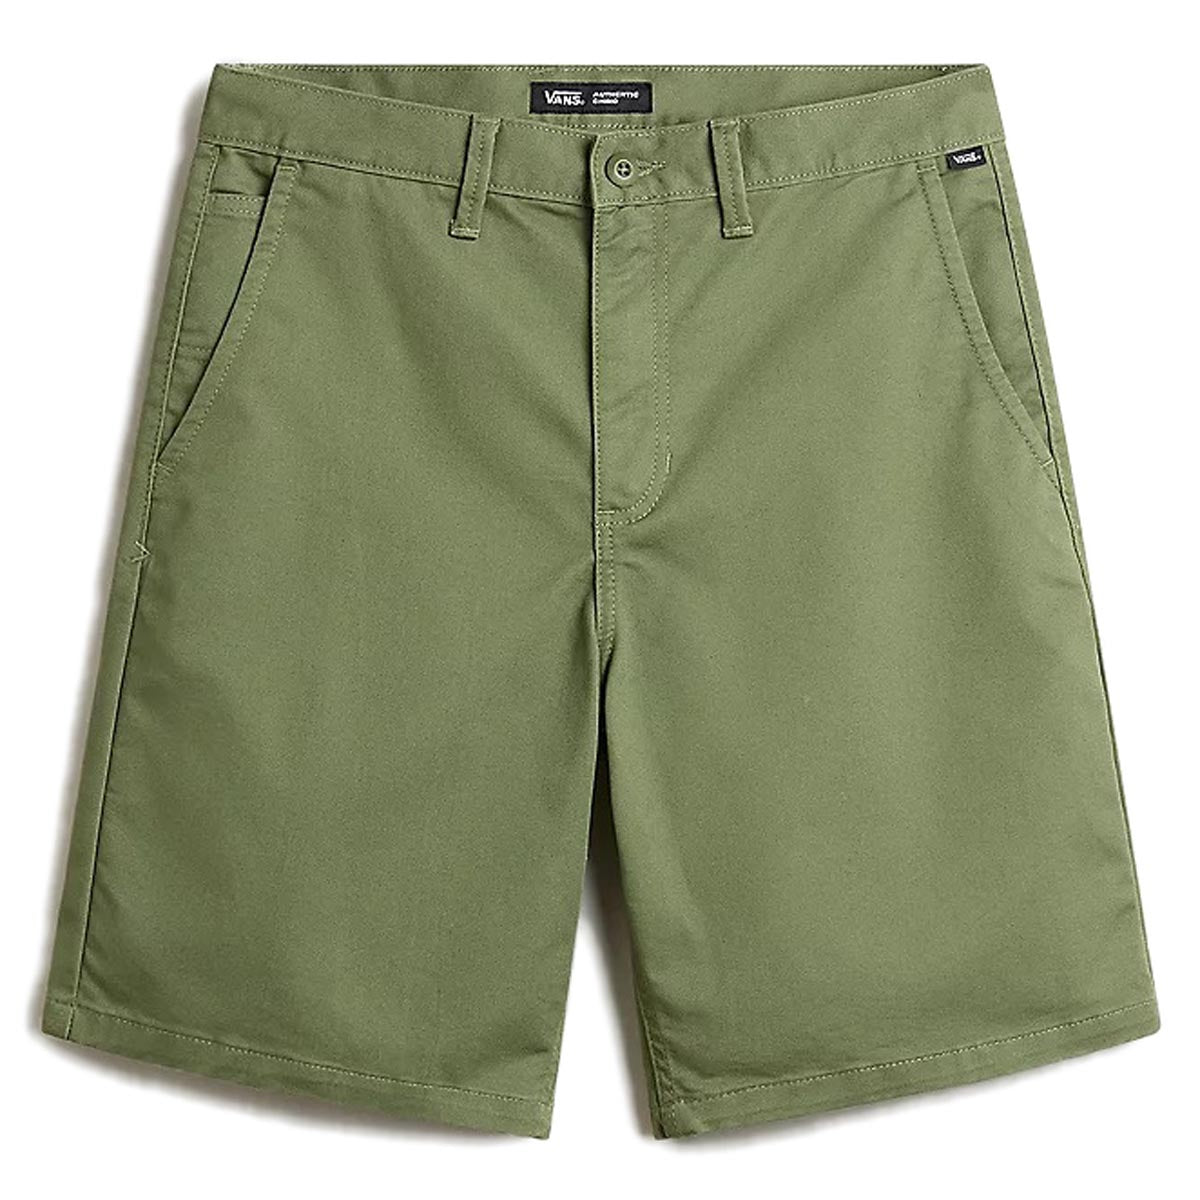 Vans Authentic Chino Relaxed Shorts - Olivine image 1